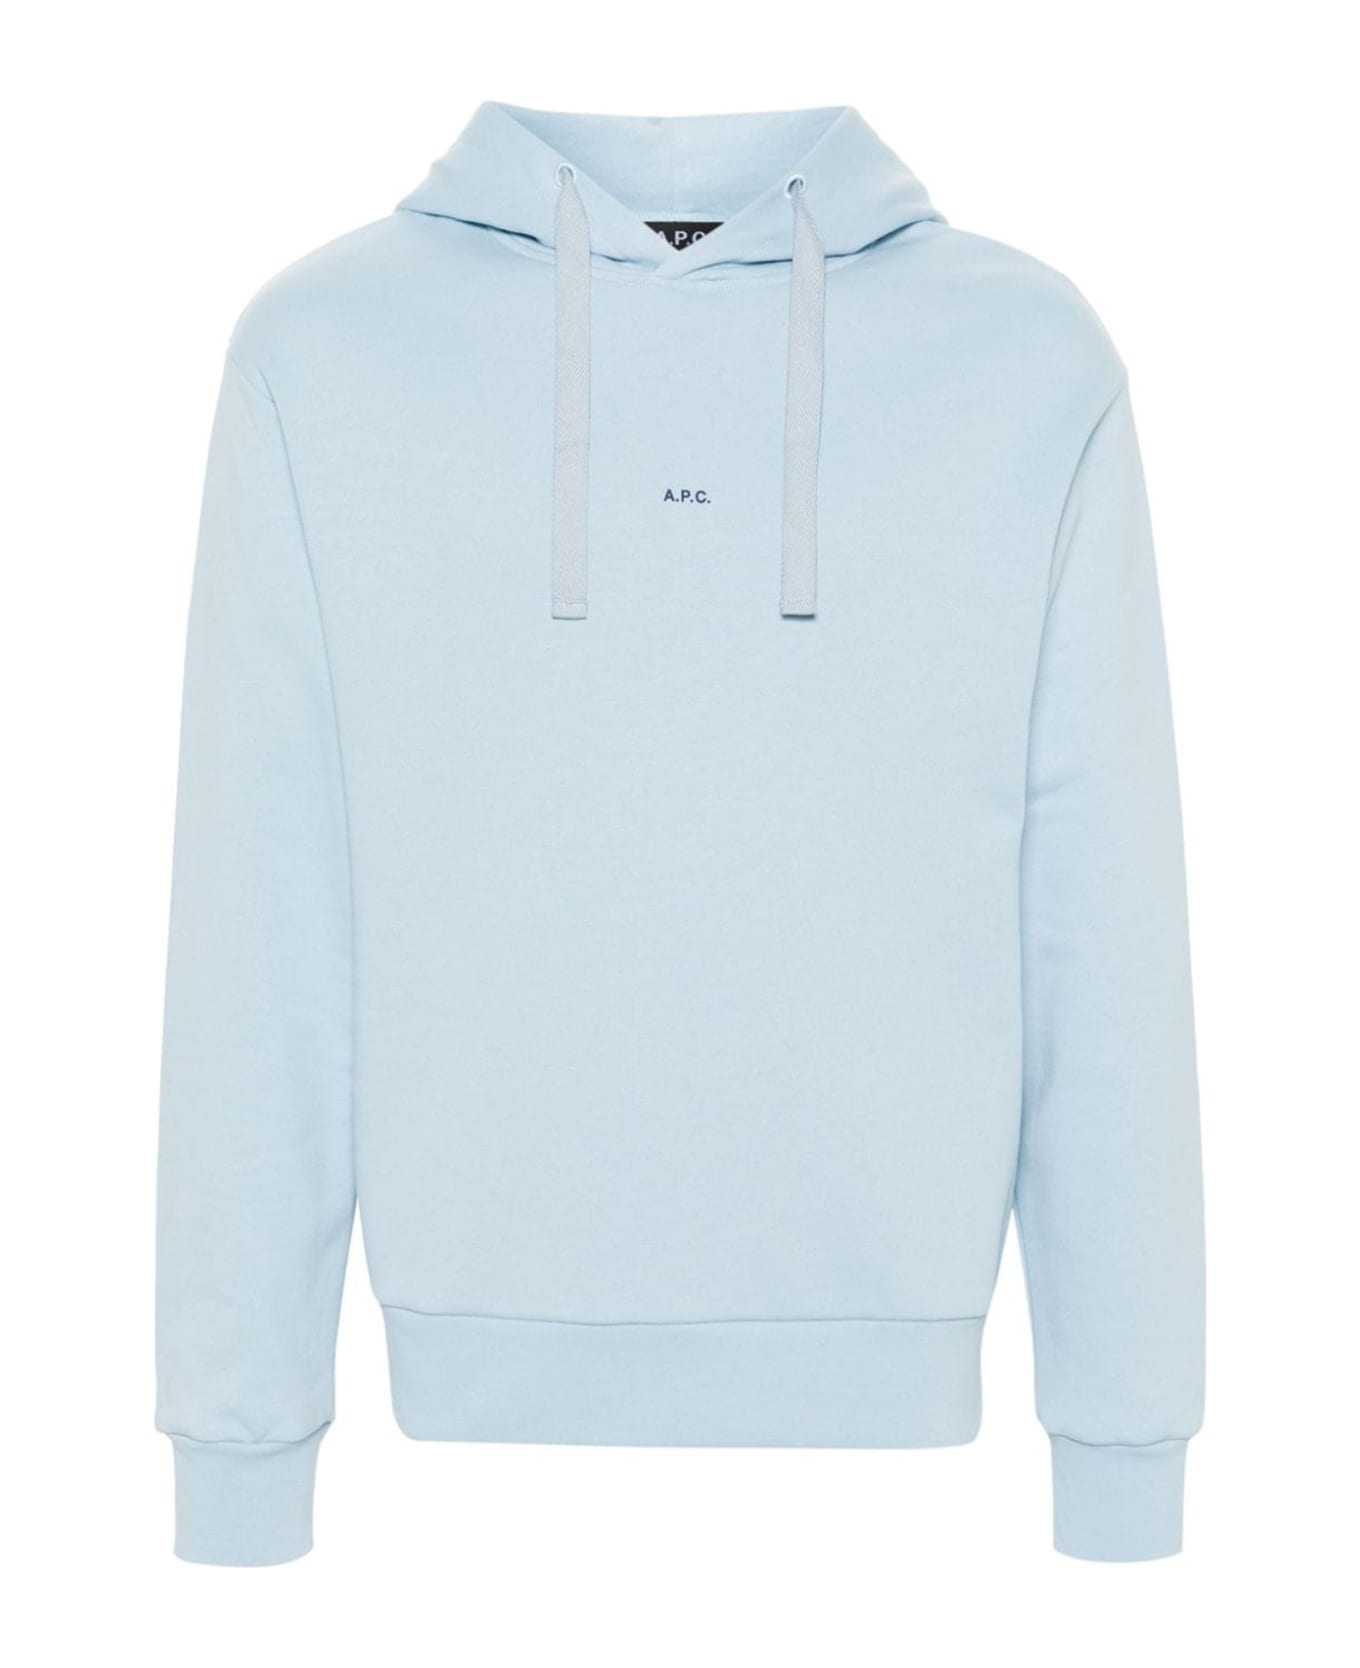 A.P.C. Logo Embroidered Drawstring Hoodie - LIGHT BLUE